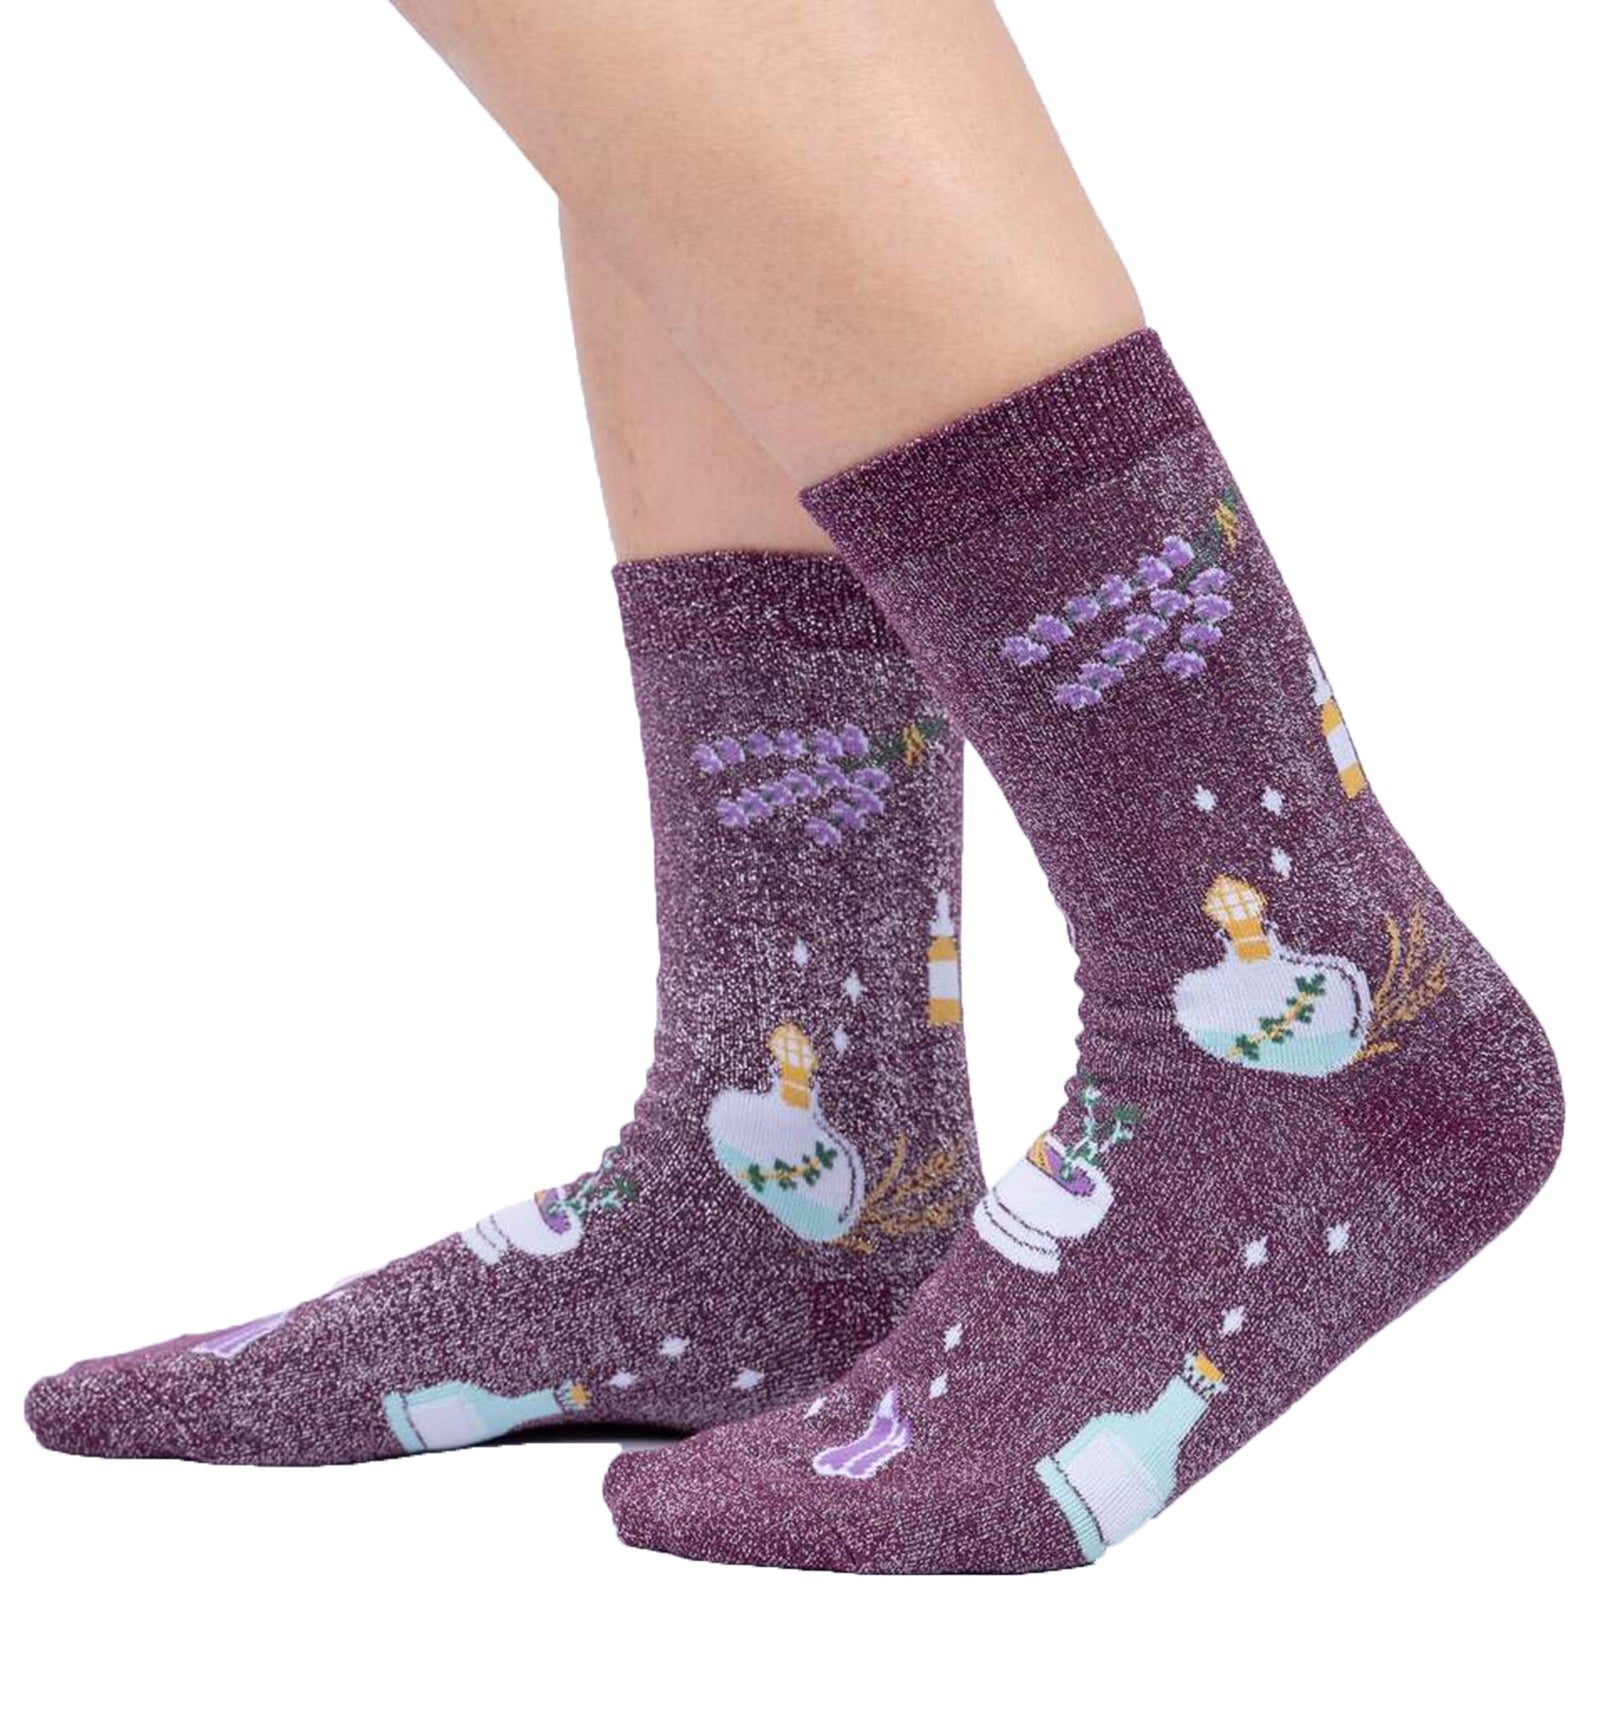 SOCK it to me Women's Crew Socks (W0438),Lotions and Potions - Lotions and Potions,One Size